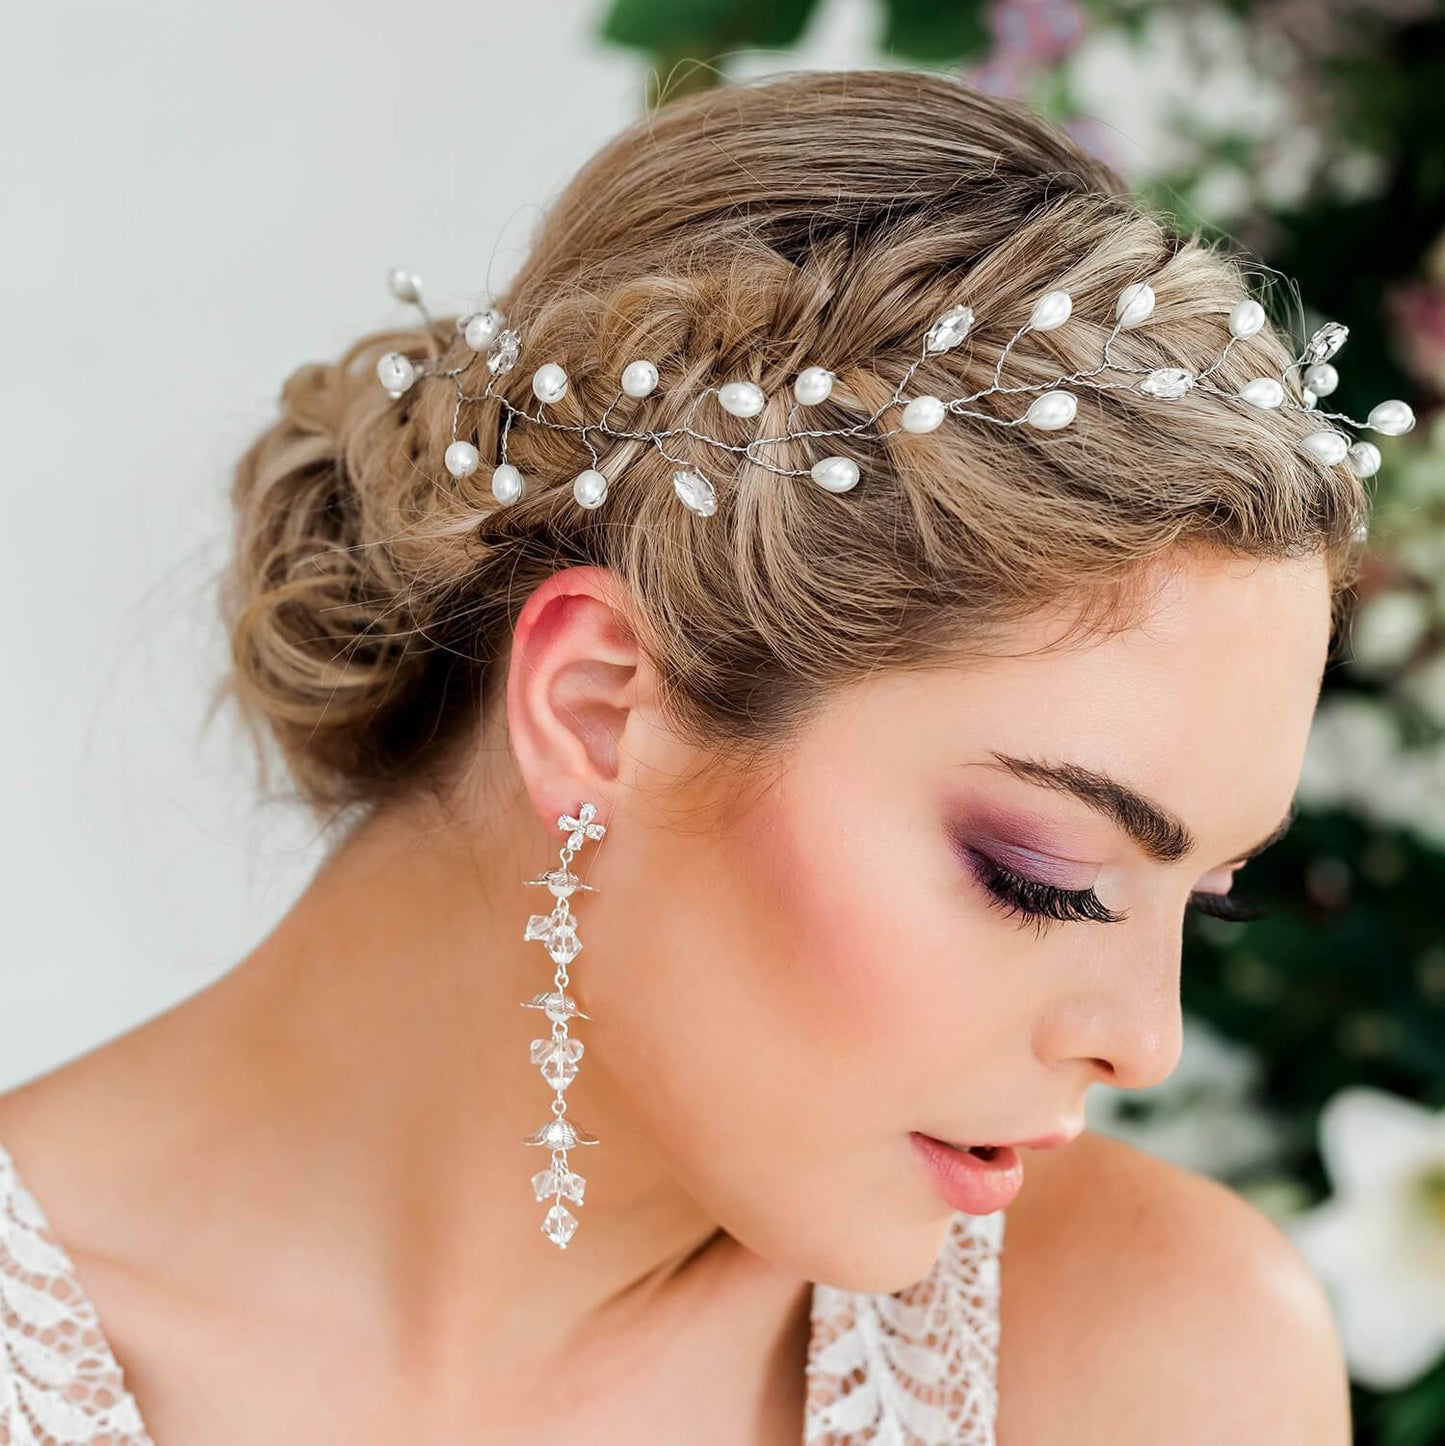 Silver Ivy Bridal Hair Vine Headpiece from side